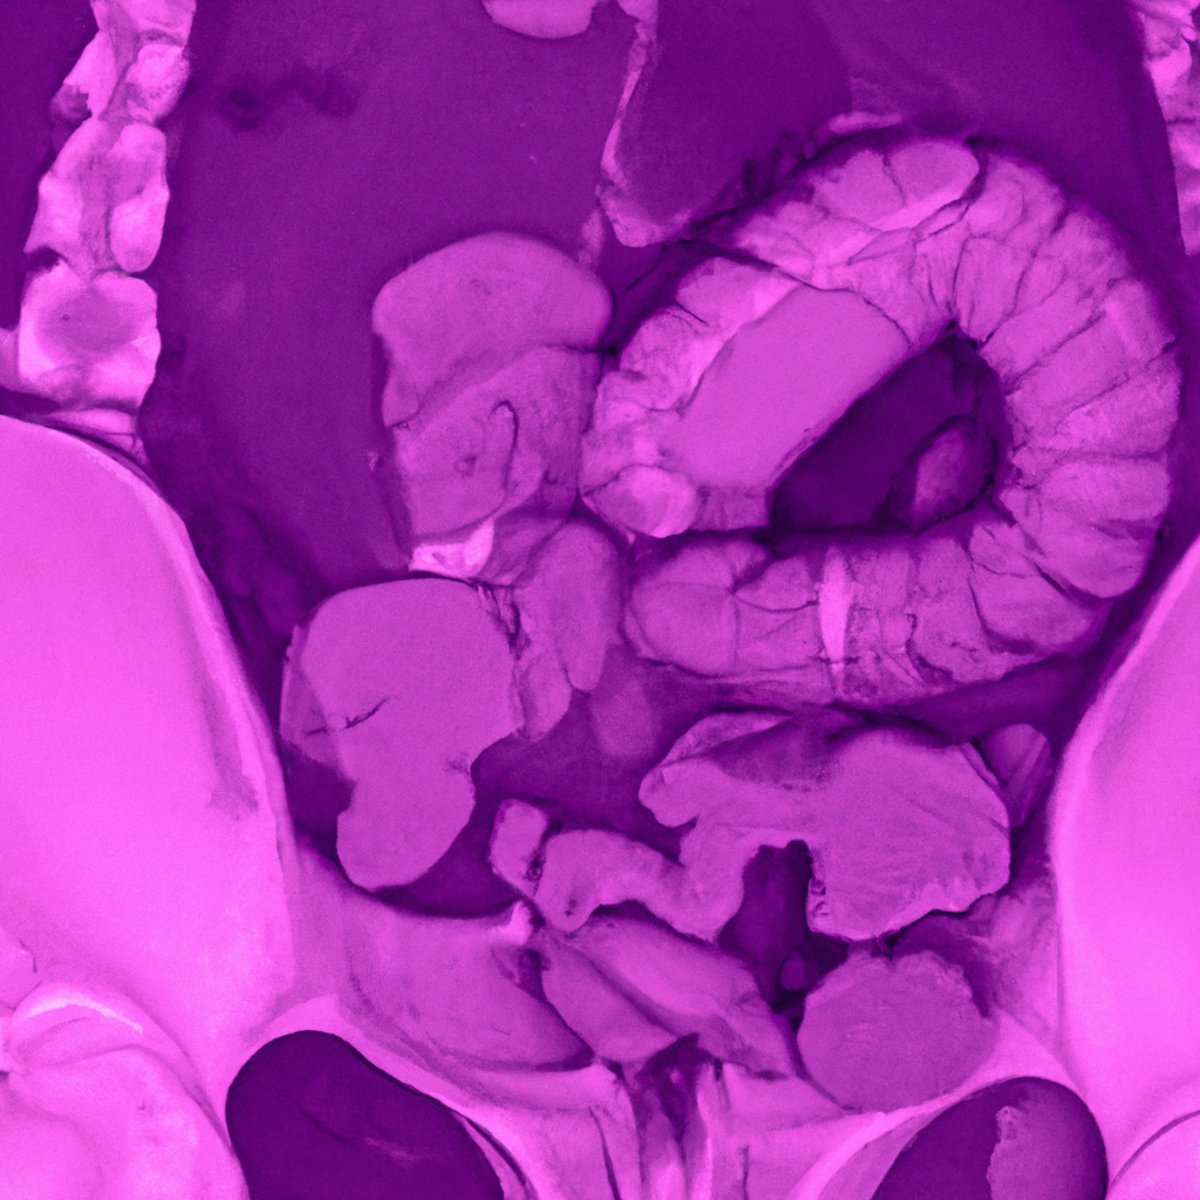 Close-up view of human stomach with dilated blood vessels in gastric antrum, illustrating Gastric Antral Vascular Ectasia (GAVE).